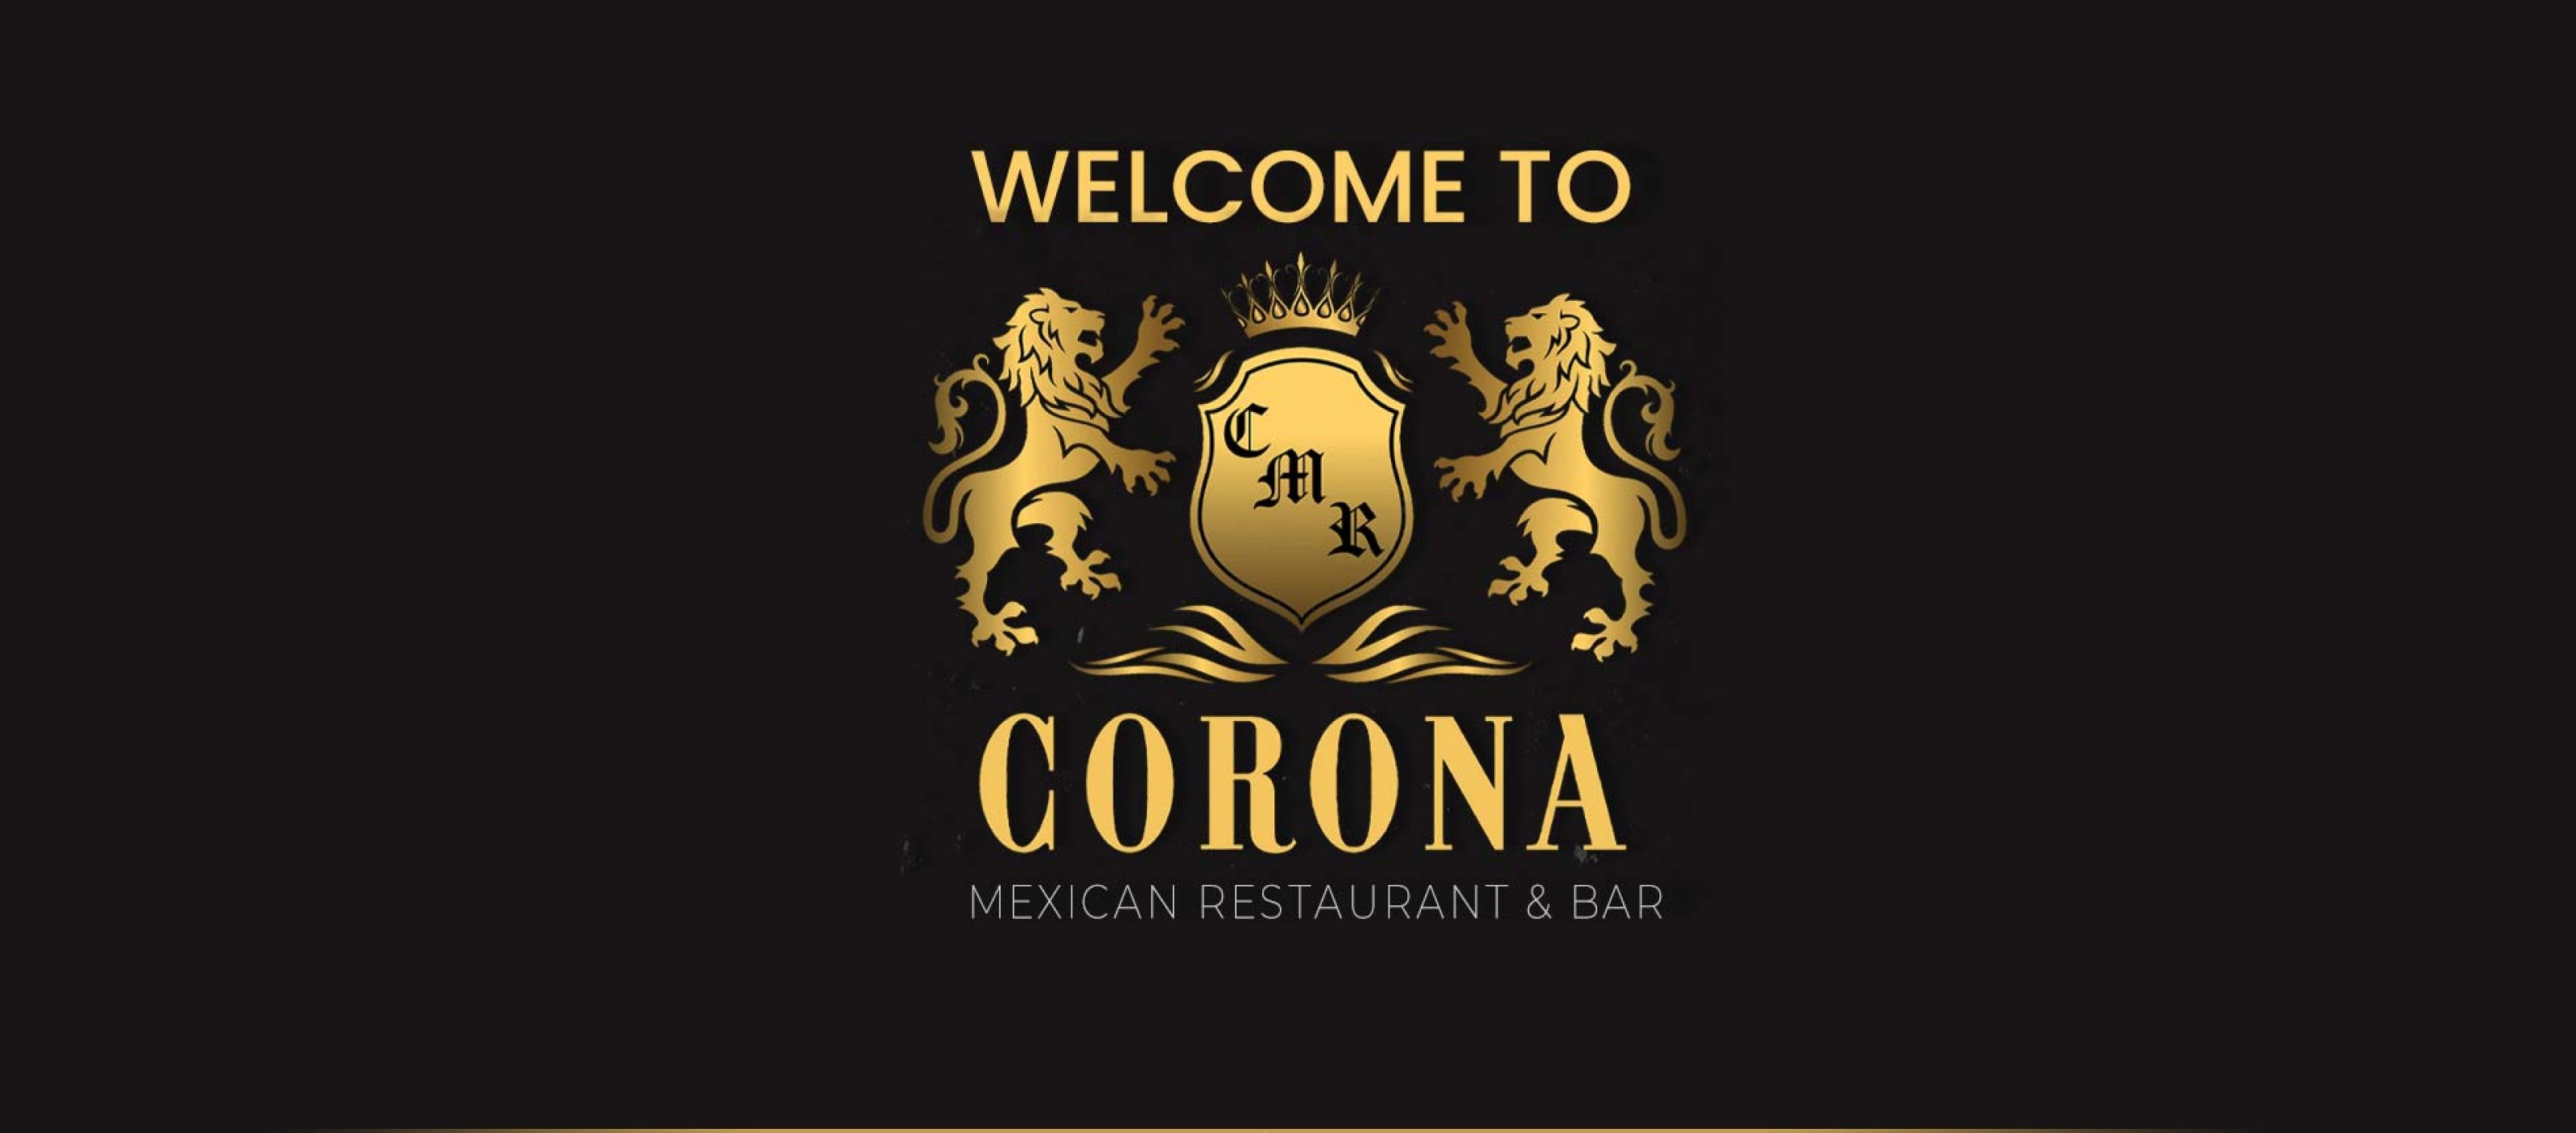 Corona Mexican Restaurant Lake Oswego - Official Site & Menu - Order Online